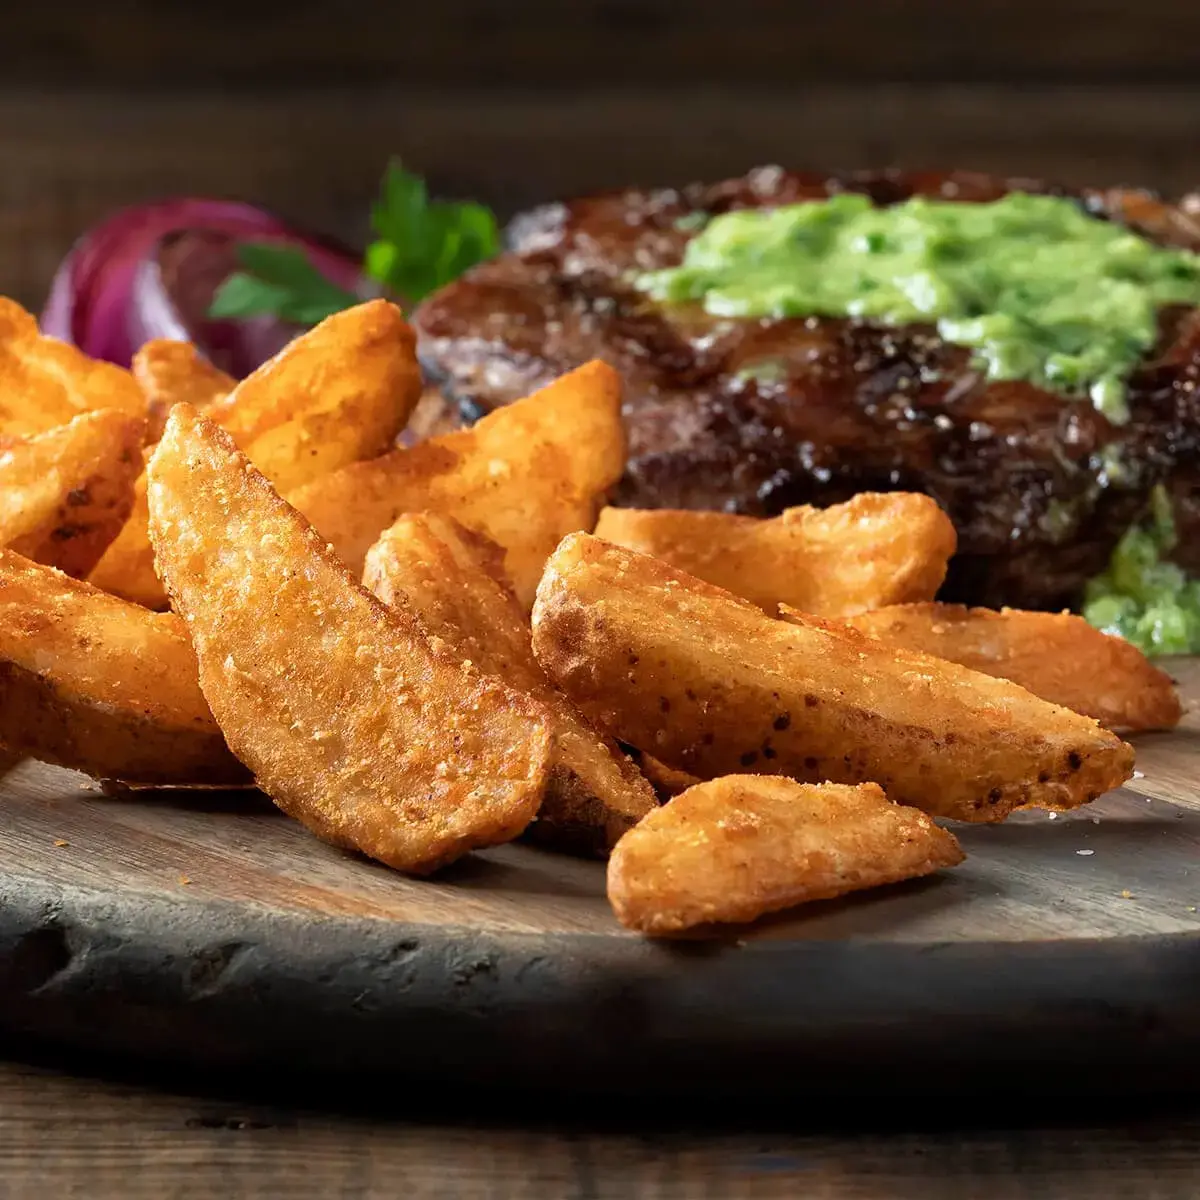 Steak and Wedge Fries with Avocado Maitre D' Butter